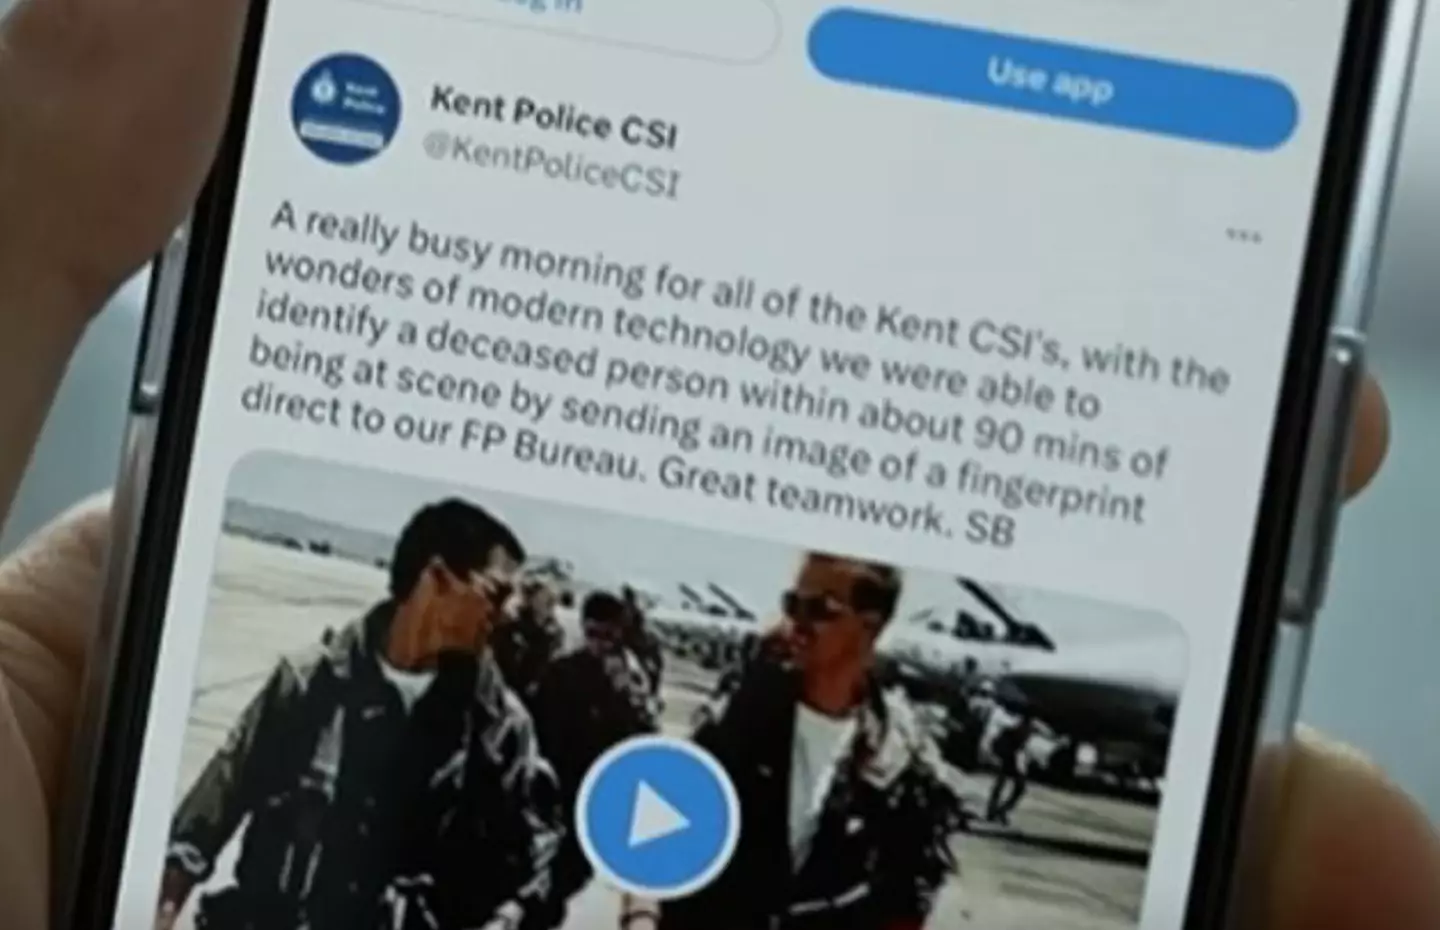 The police used a Top Gun GIF to celebrate identifying Azar's body.